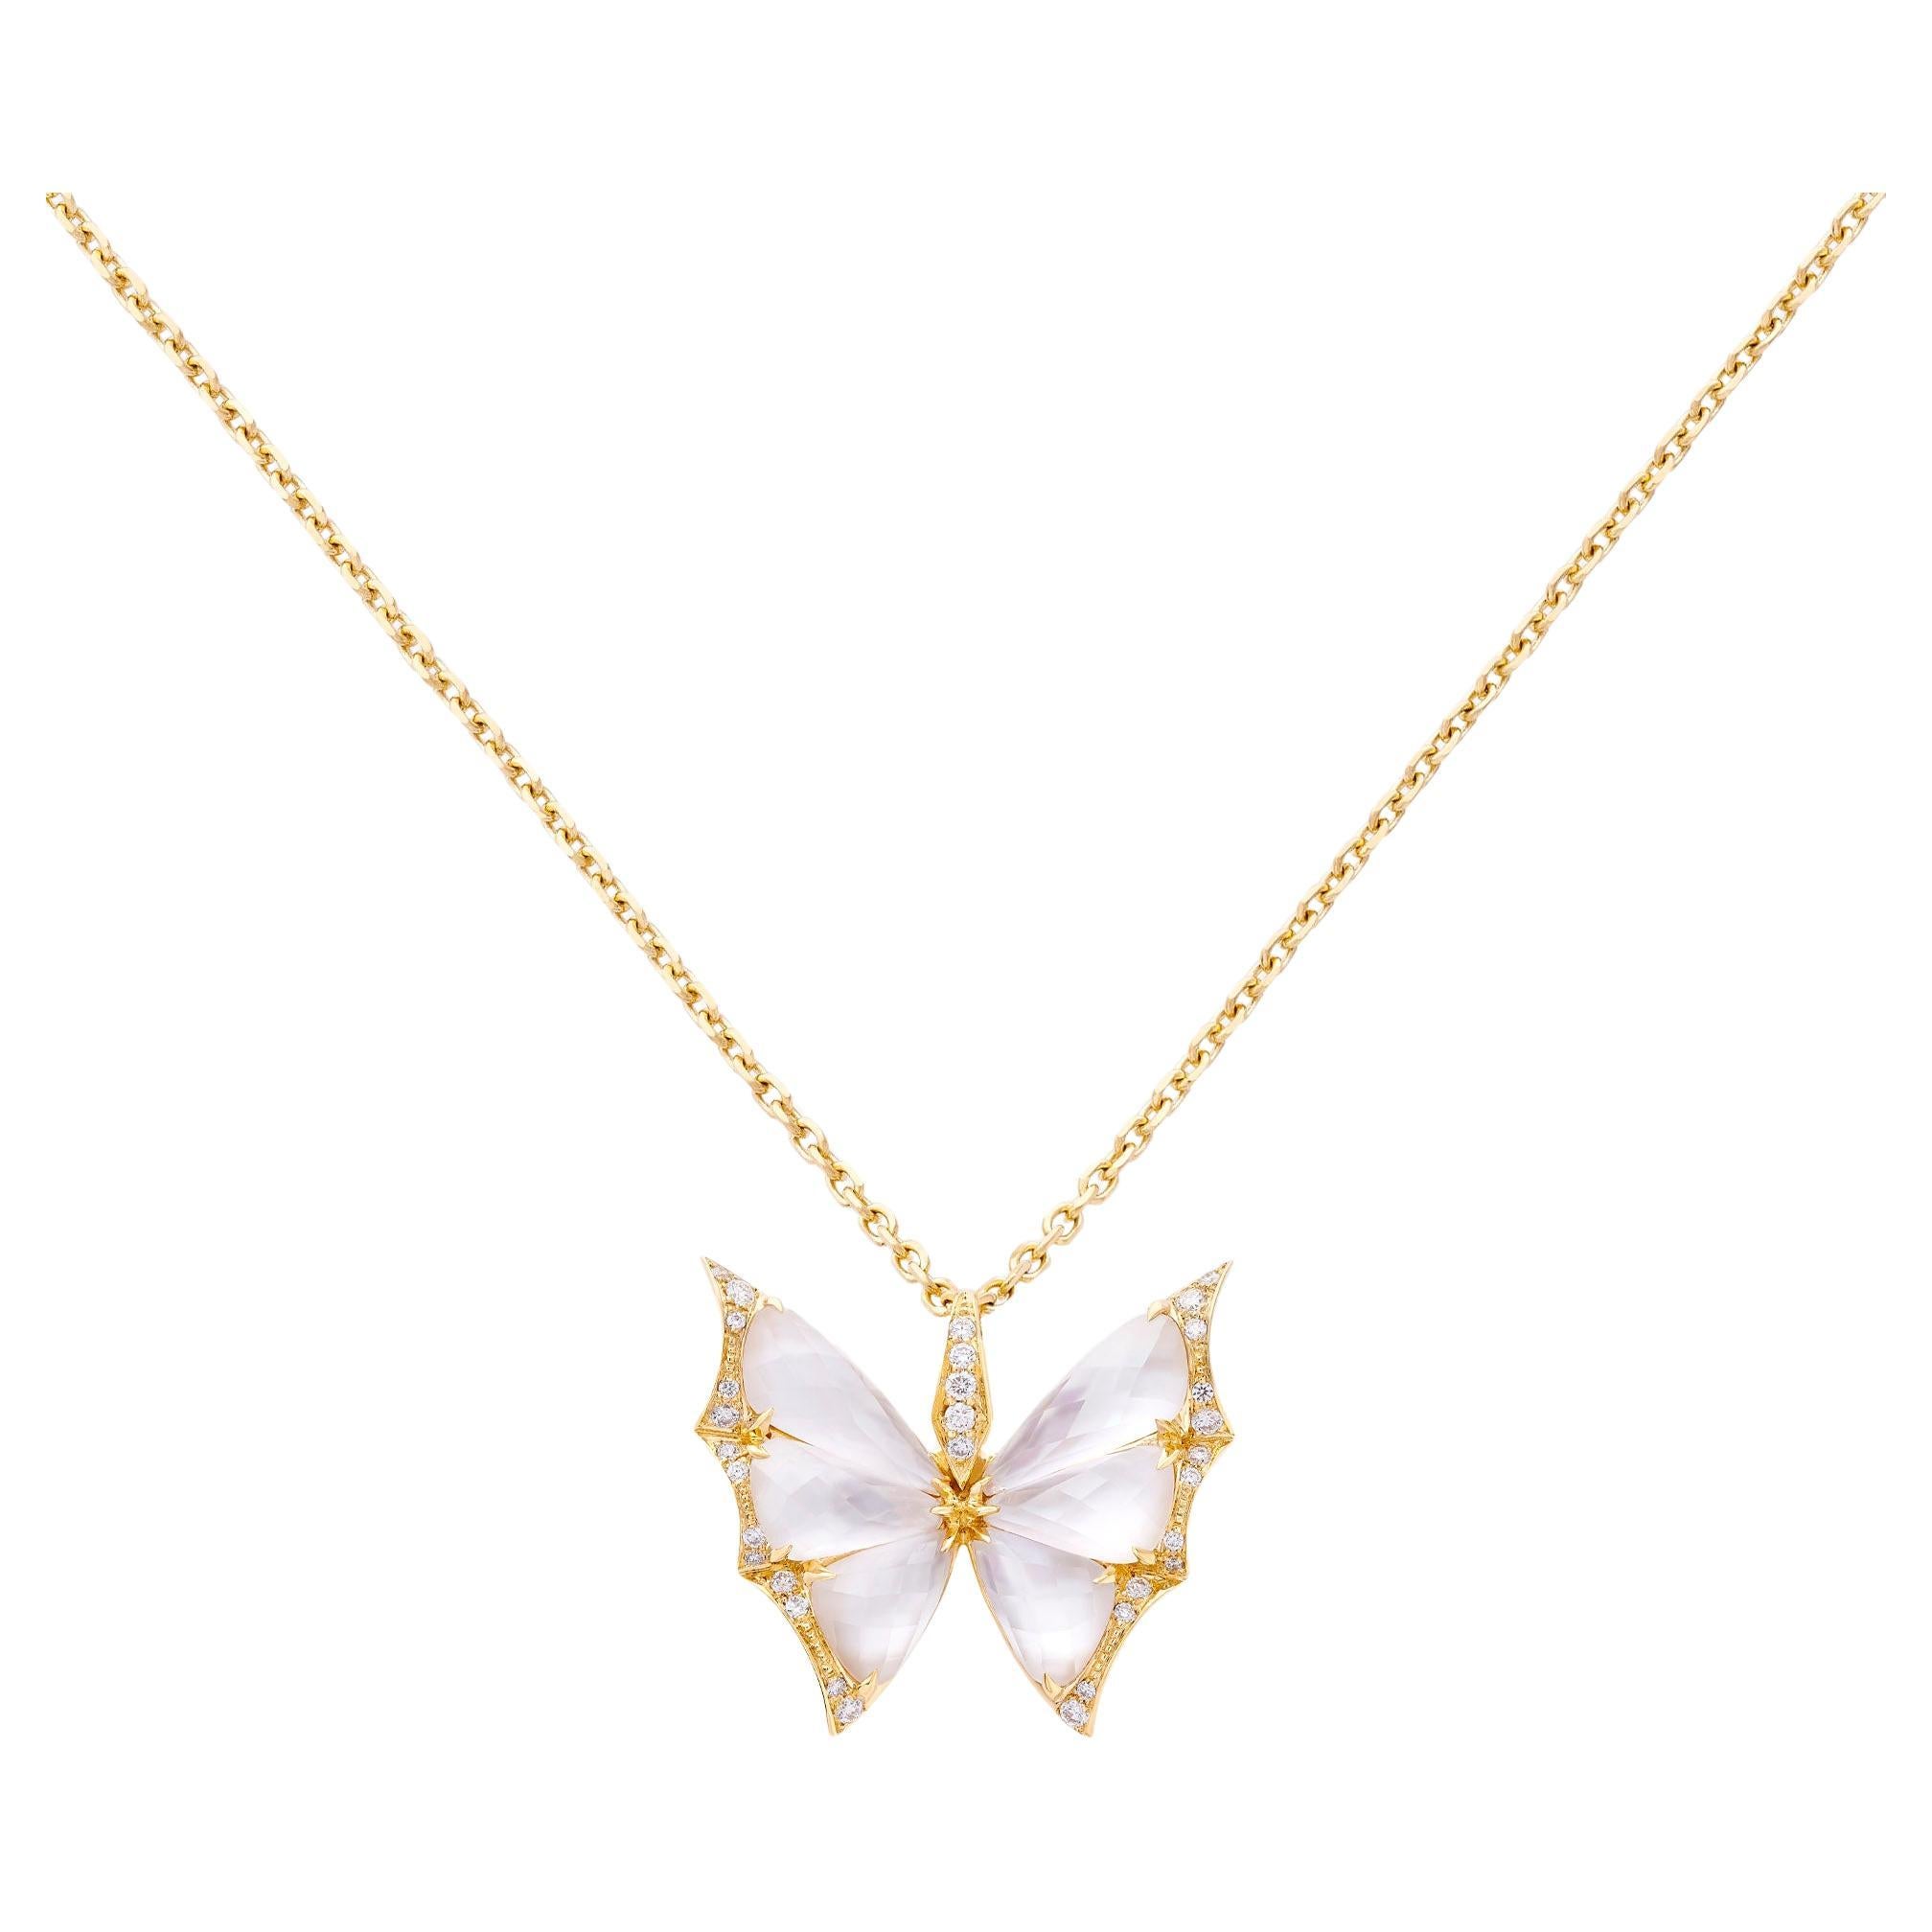 Crystal Haze Pendant - 18 Carat Yellow Gold and Mother of Pearl For Sale